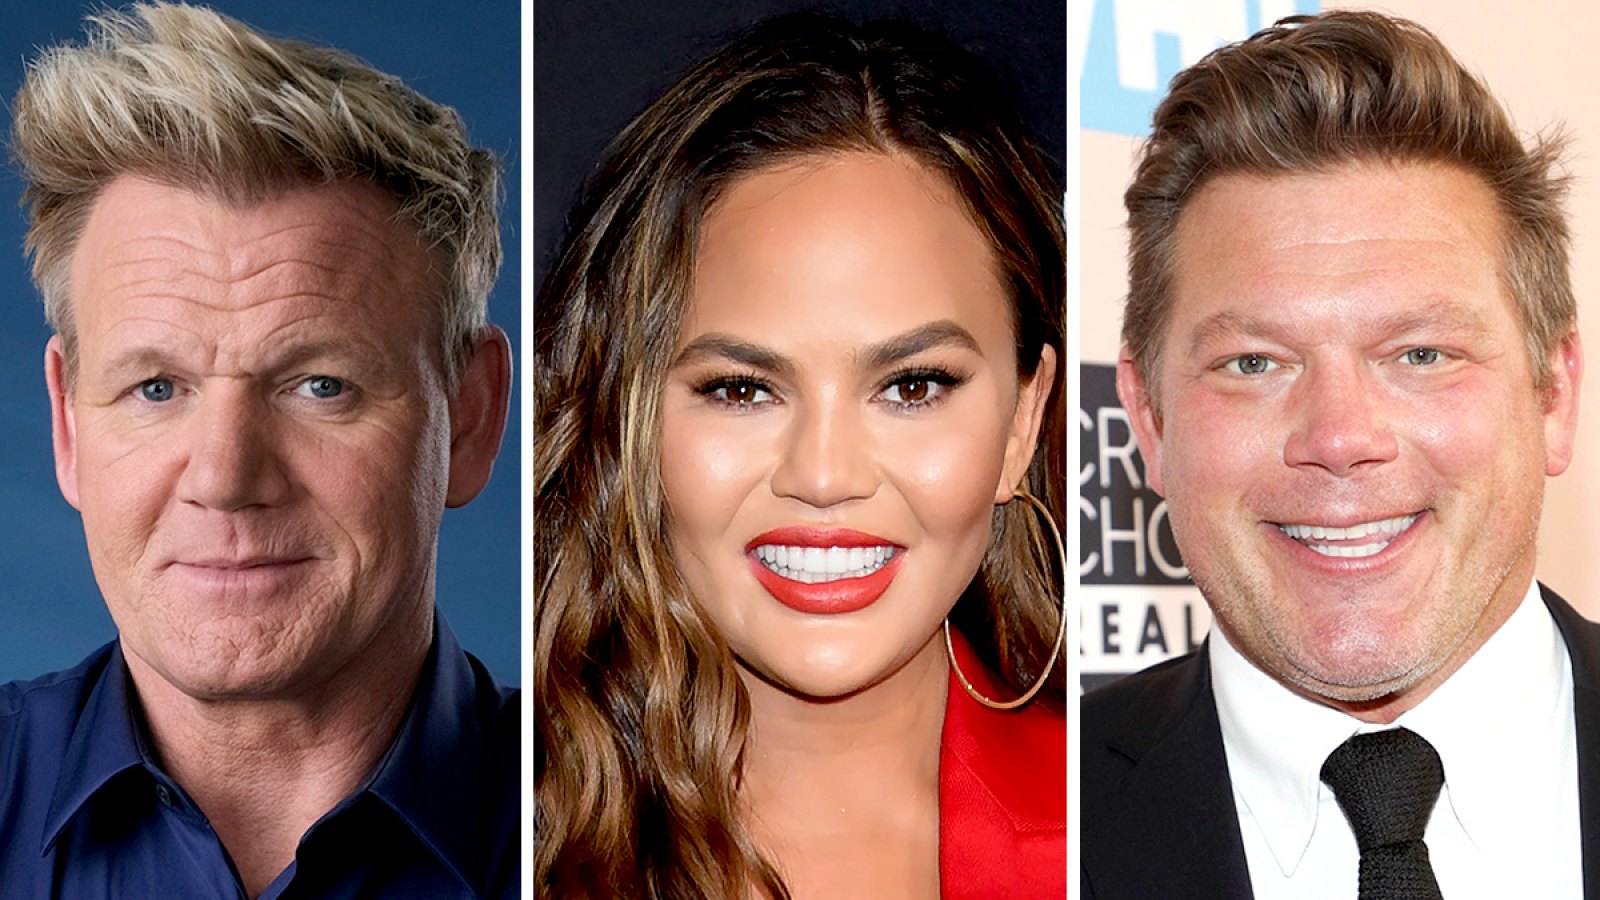 Gordon-Ramsay-Weighs-in-After-Chrissy-Teigen-Sugests-Tyler-Florence-Dish